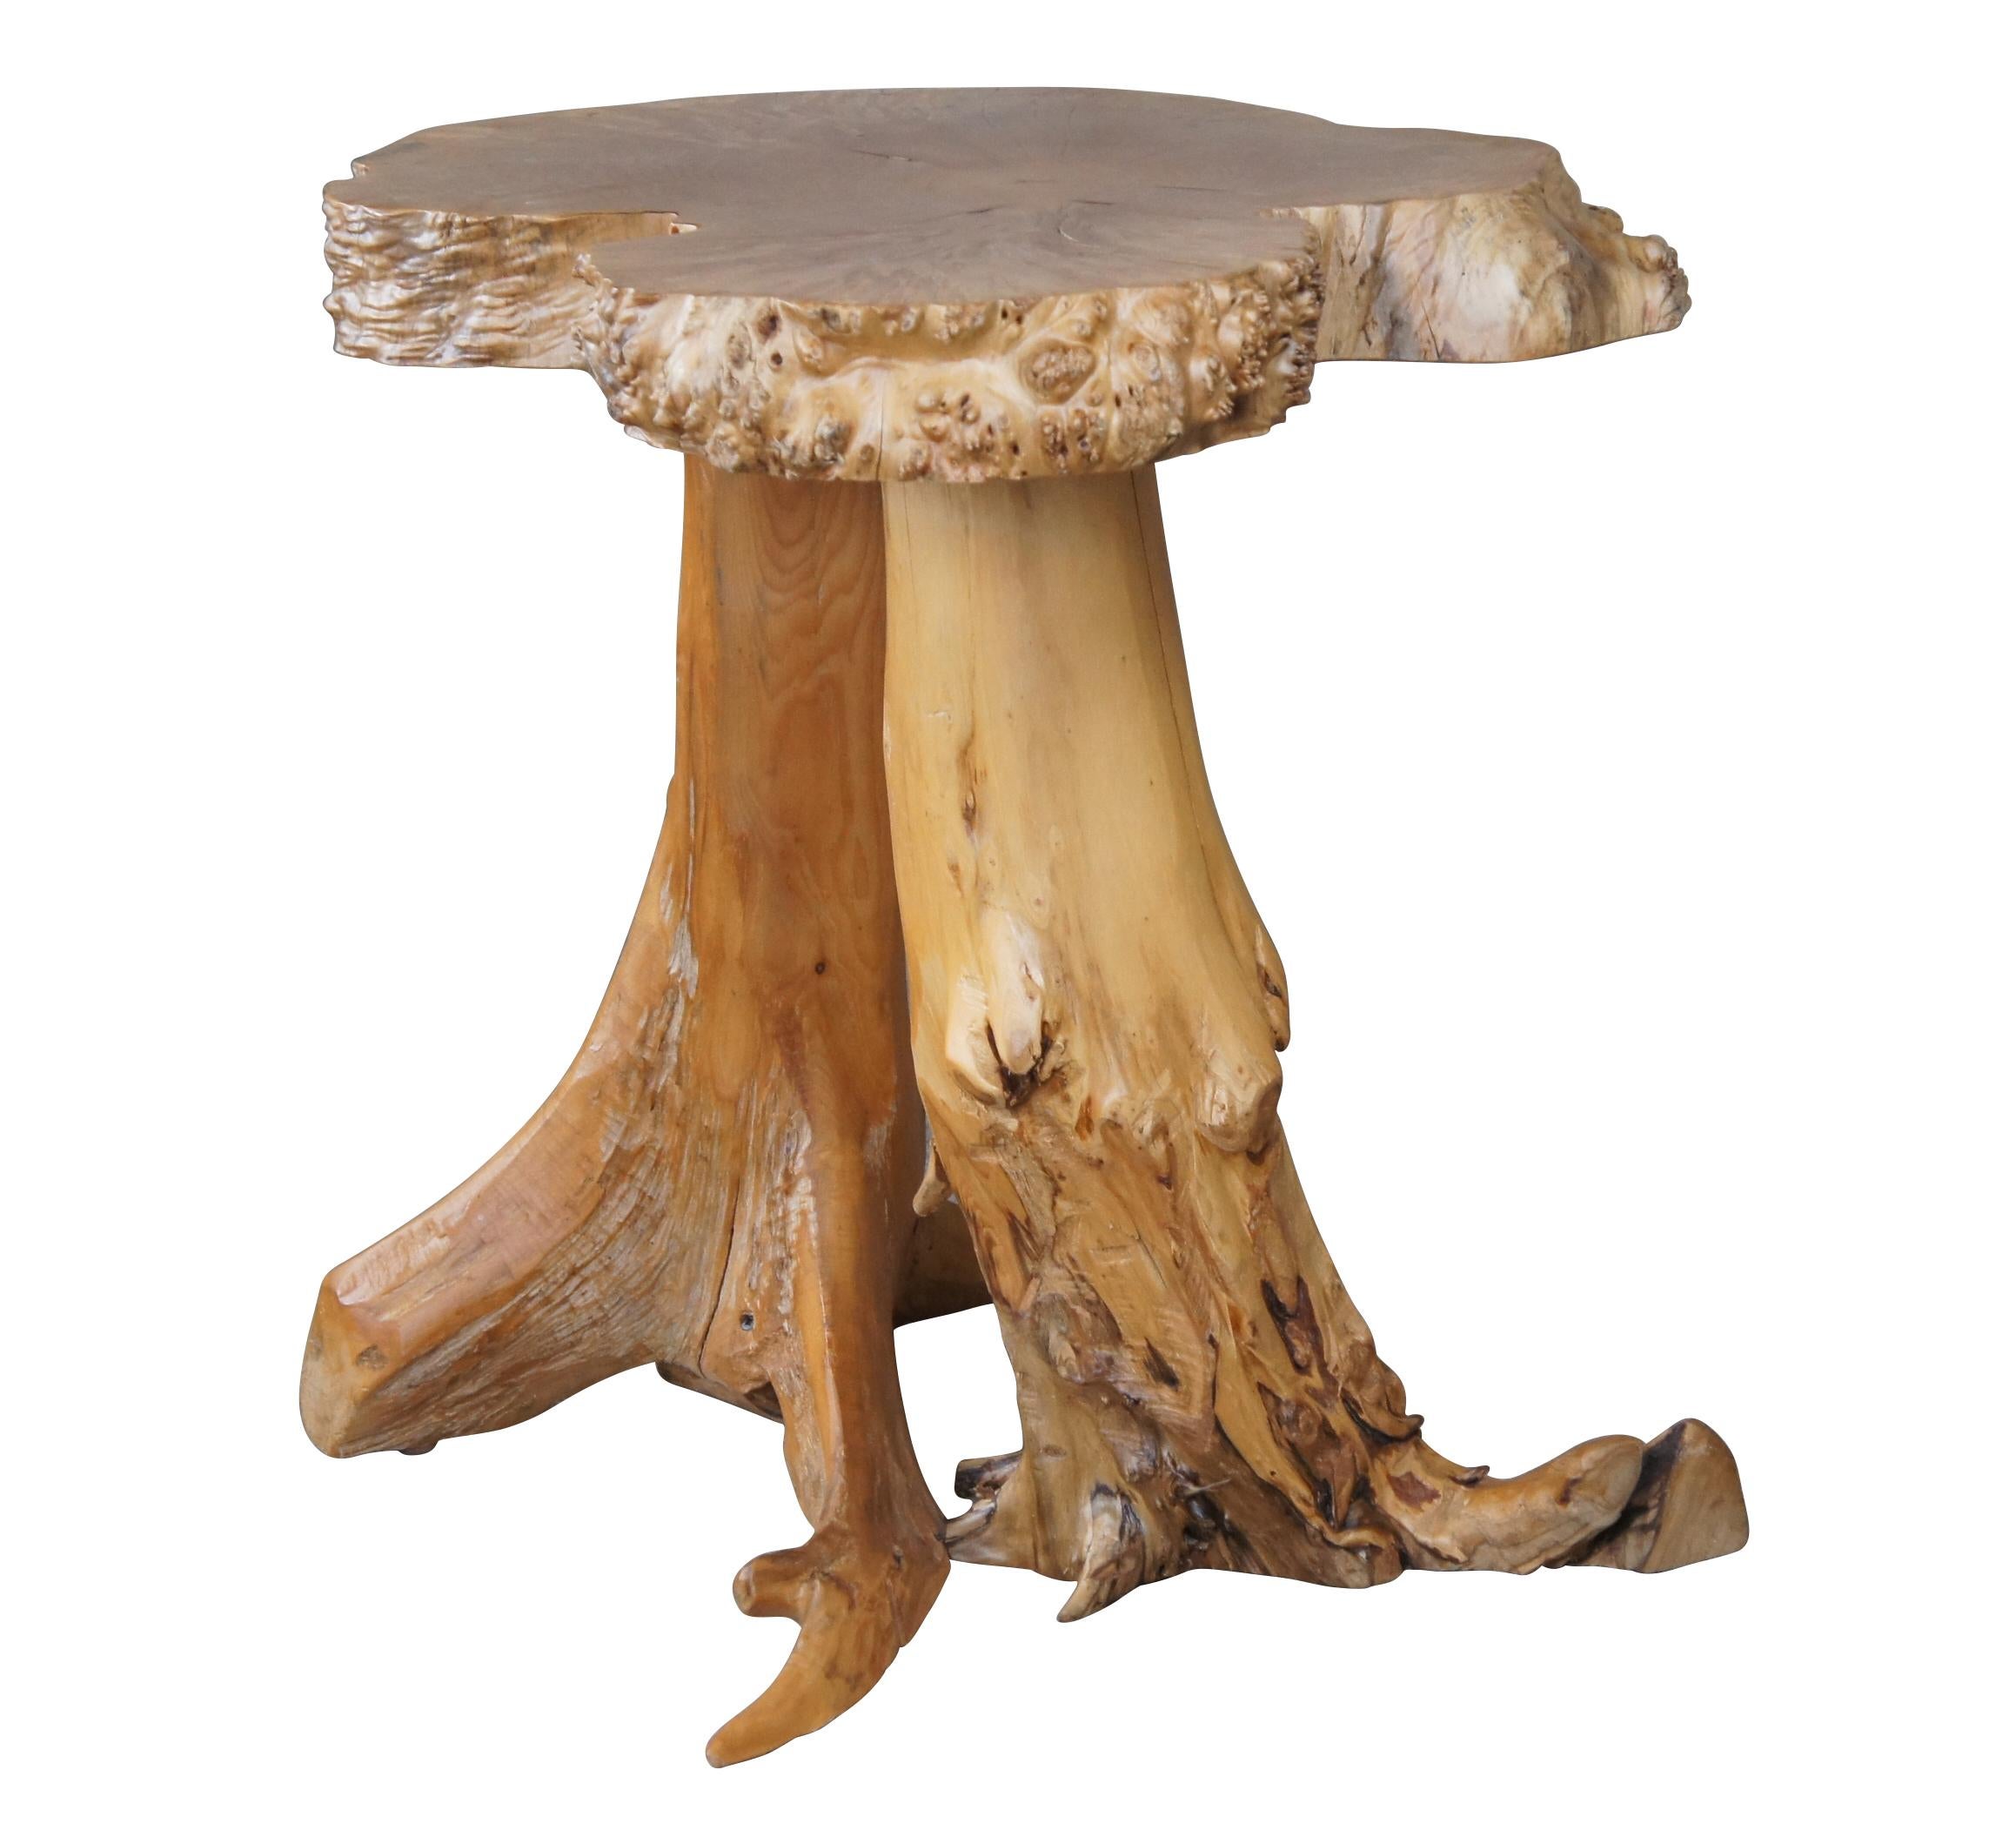 An impressive farmhouse or lodge side table. Features a Maple Burl live edge slab top over branched base. Great for use next to your favorite lounge chair as a cocktail or martini end table.

